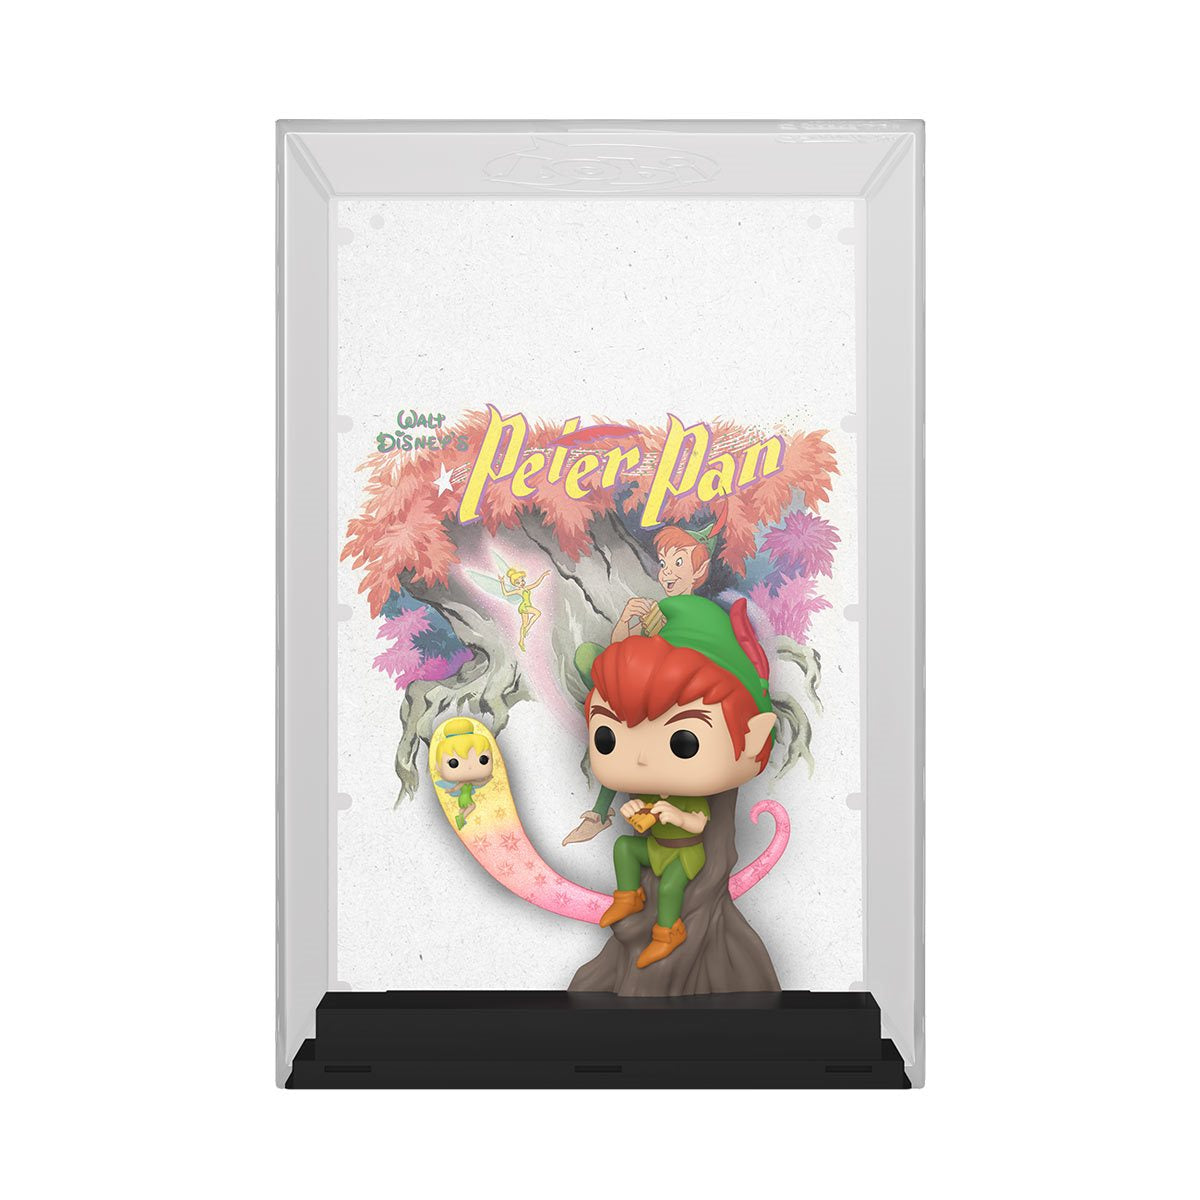 Funko Pop! Disney 100 Peter Pan Movie Poster with Case #16